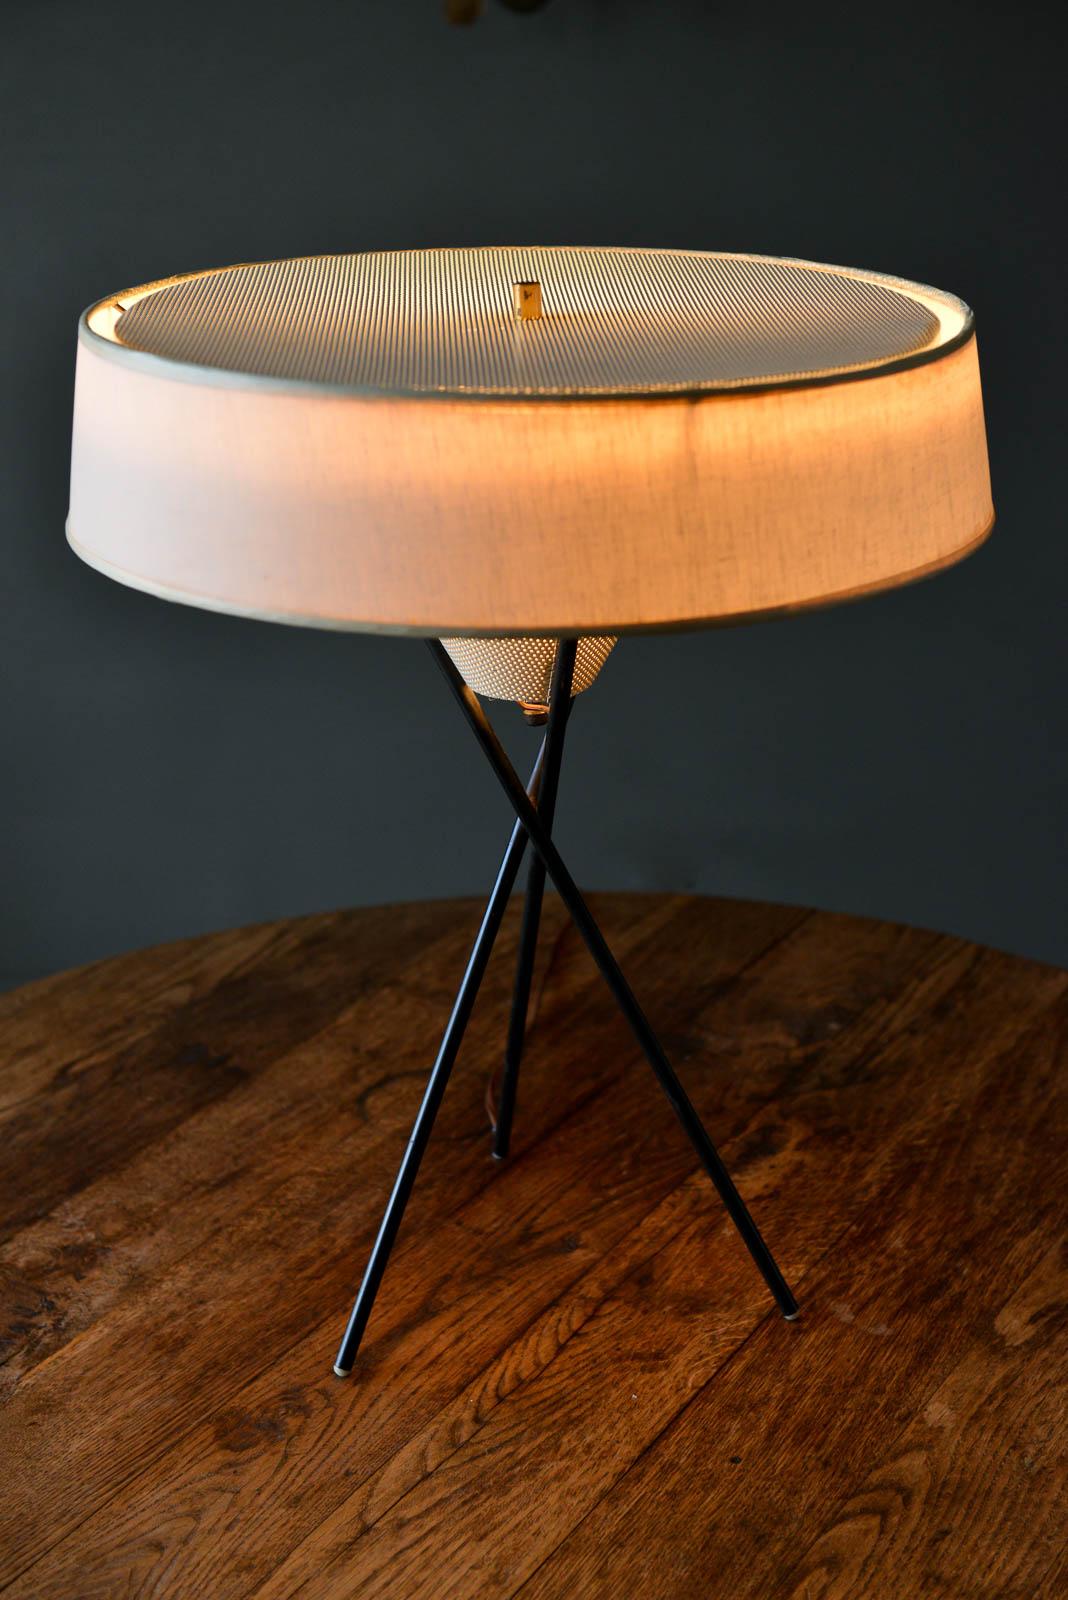 Gerald Thurston for Lightolier tripod base table lamp, circa 1955. Beautiful original fiberglass shade with original metal enamel diffuser. Original wiring in very good working condition. Some slight wear to enamel cone as shown, otherwise very